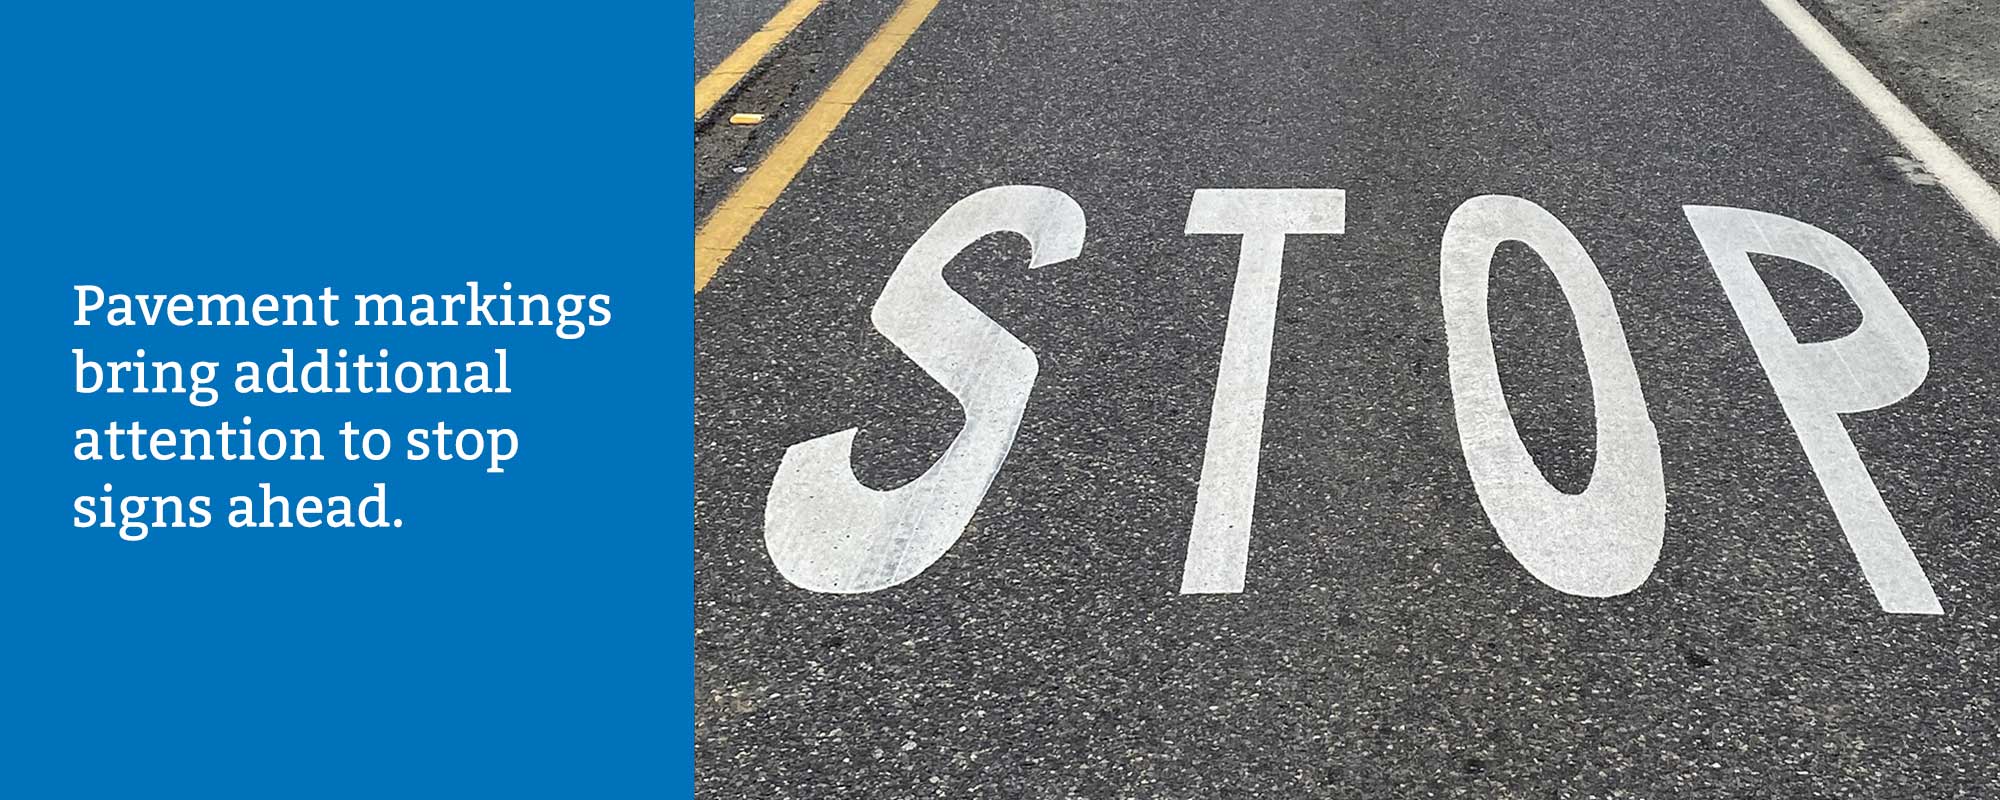 Pavement markings bring additional attention to stop signs ahead. 